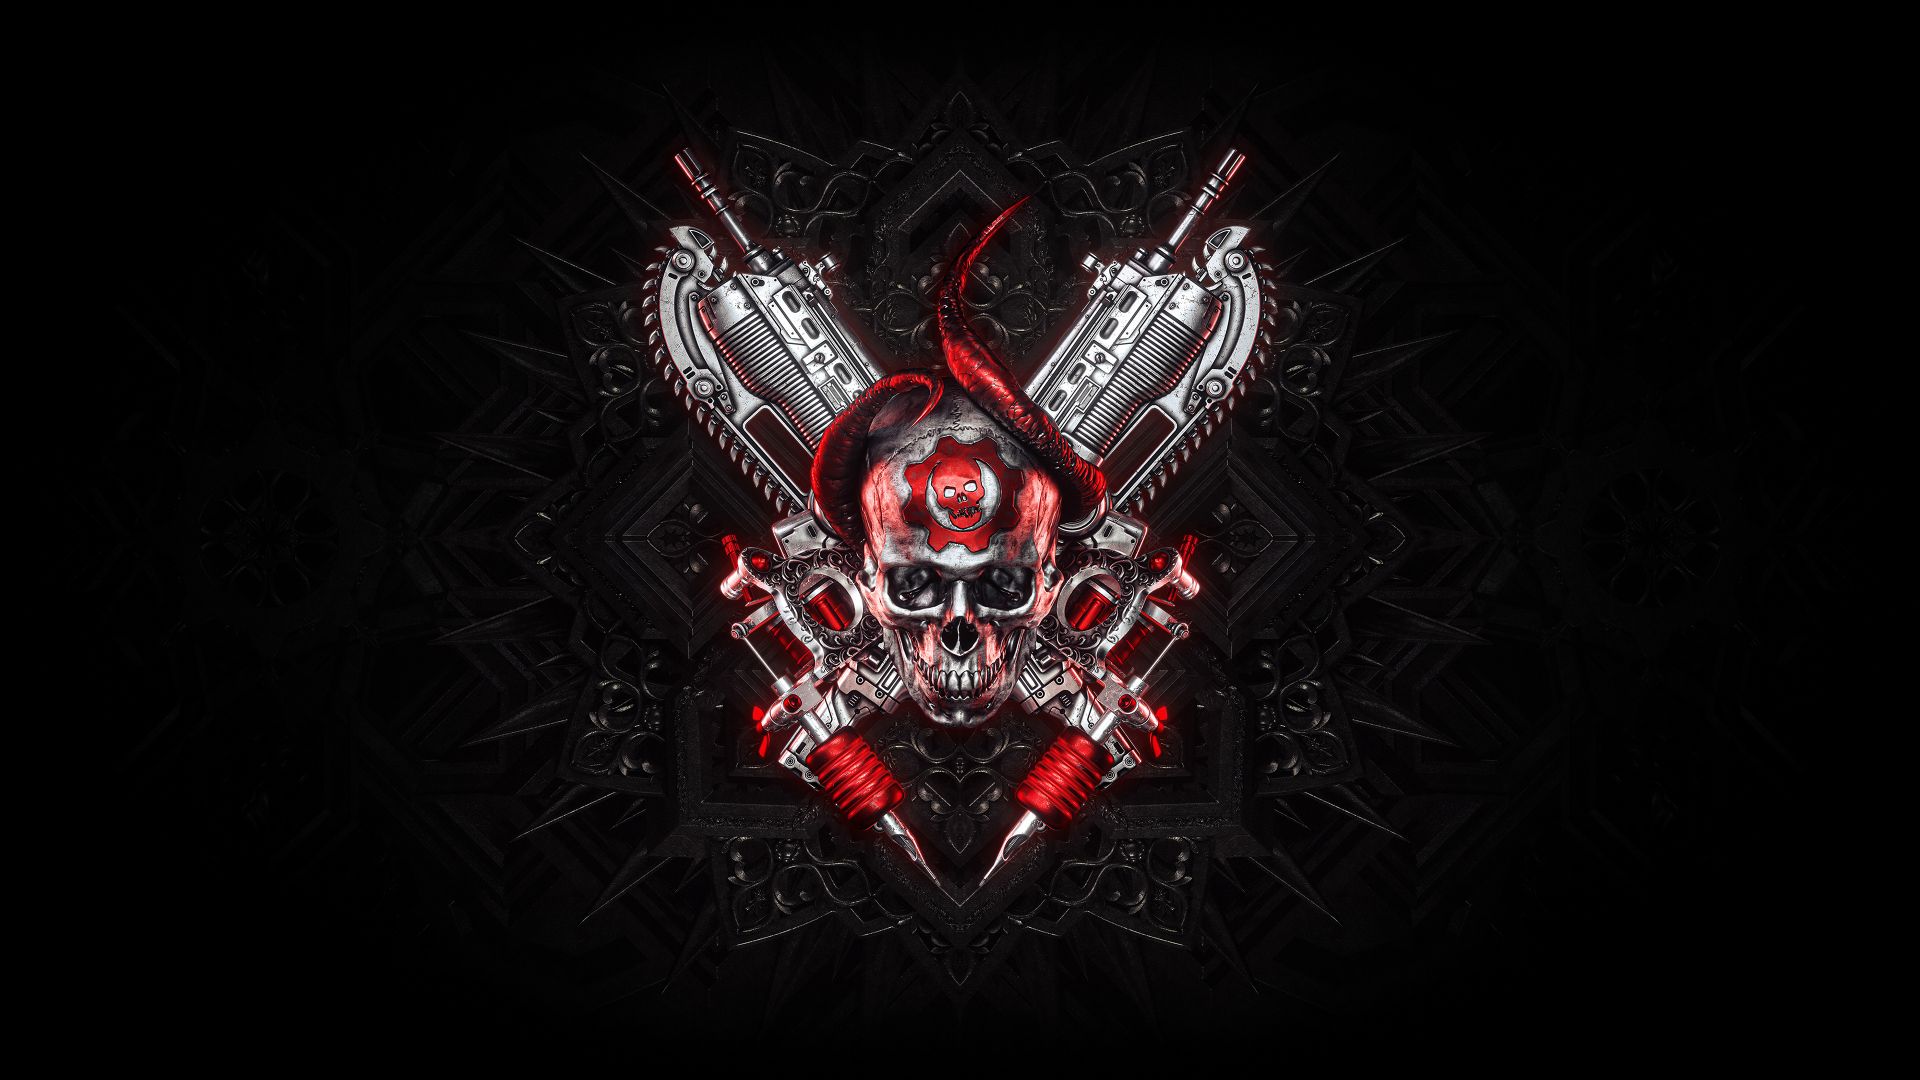 Gears of war, skull and guns, logo wallpaper, HD image, picture, background, 647737